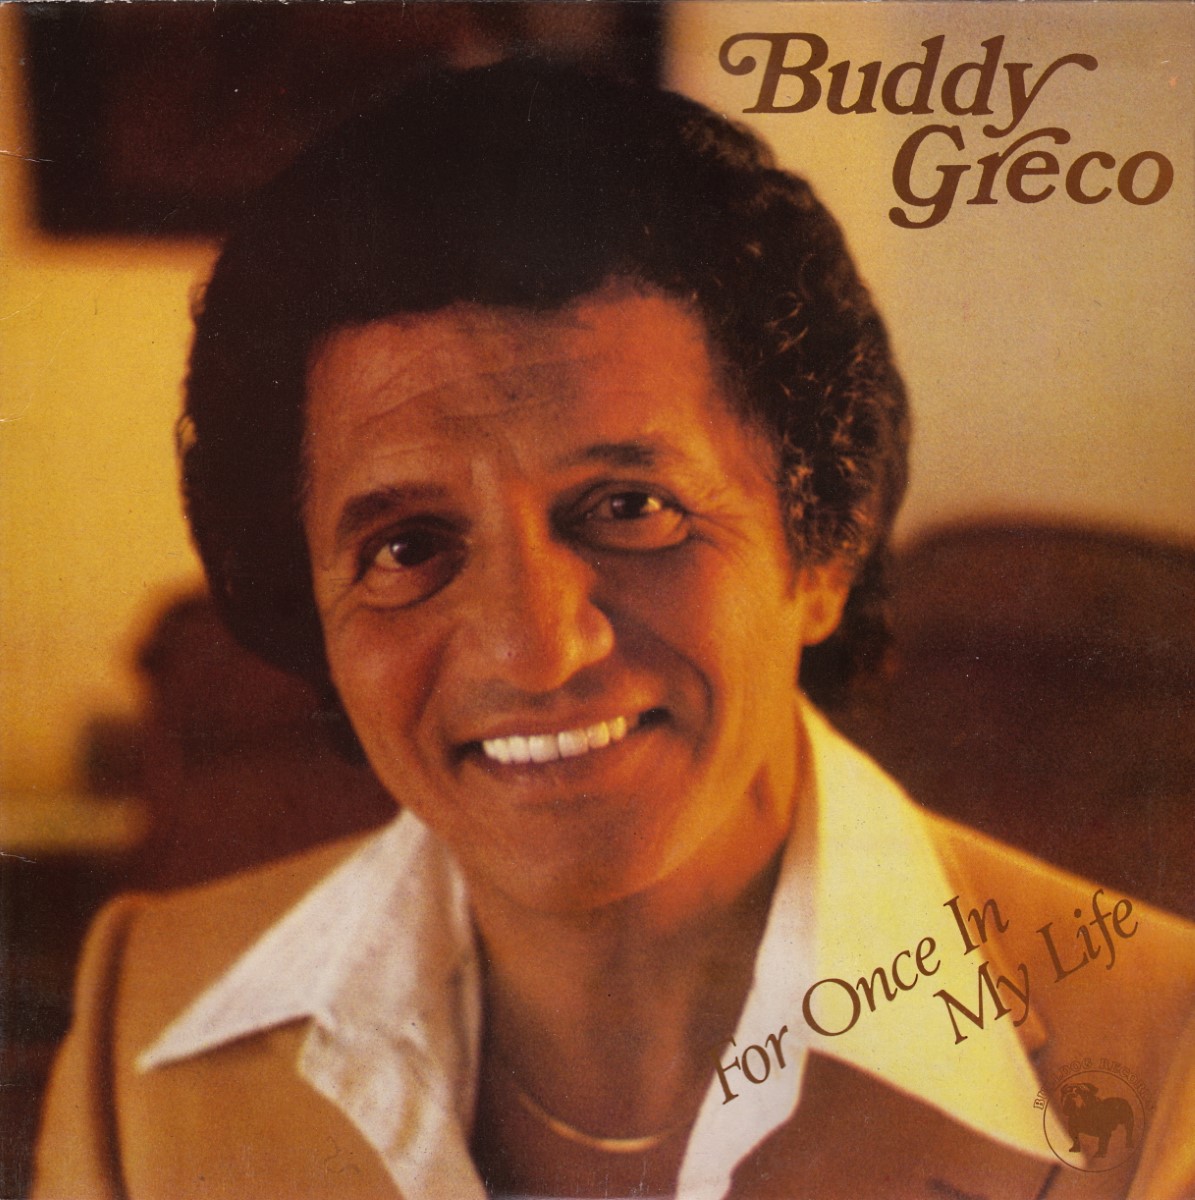 Buddy Greco - For Once In My Life (1981)